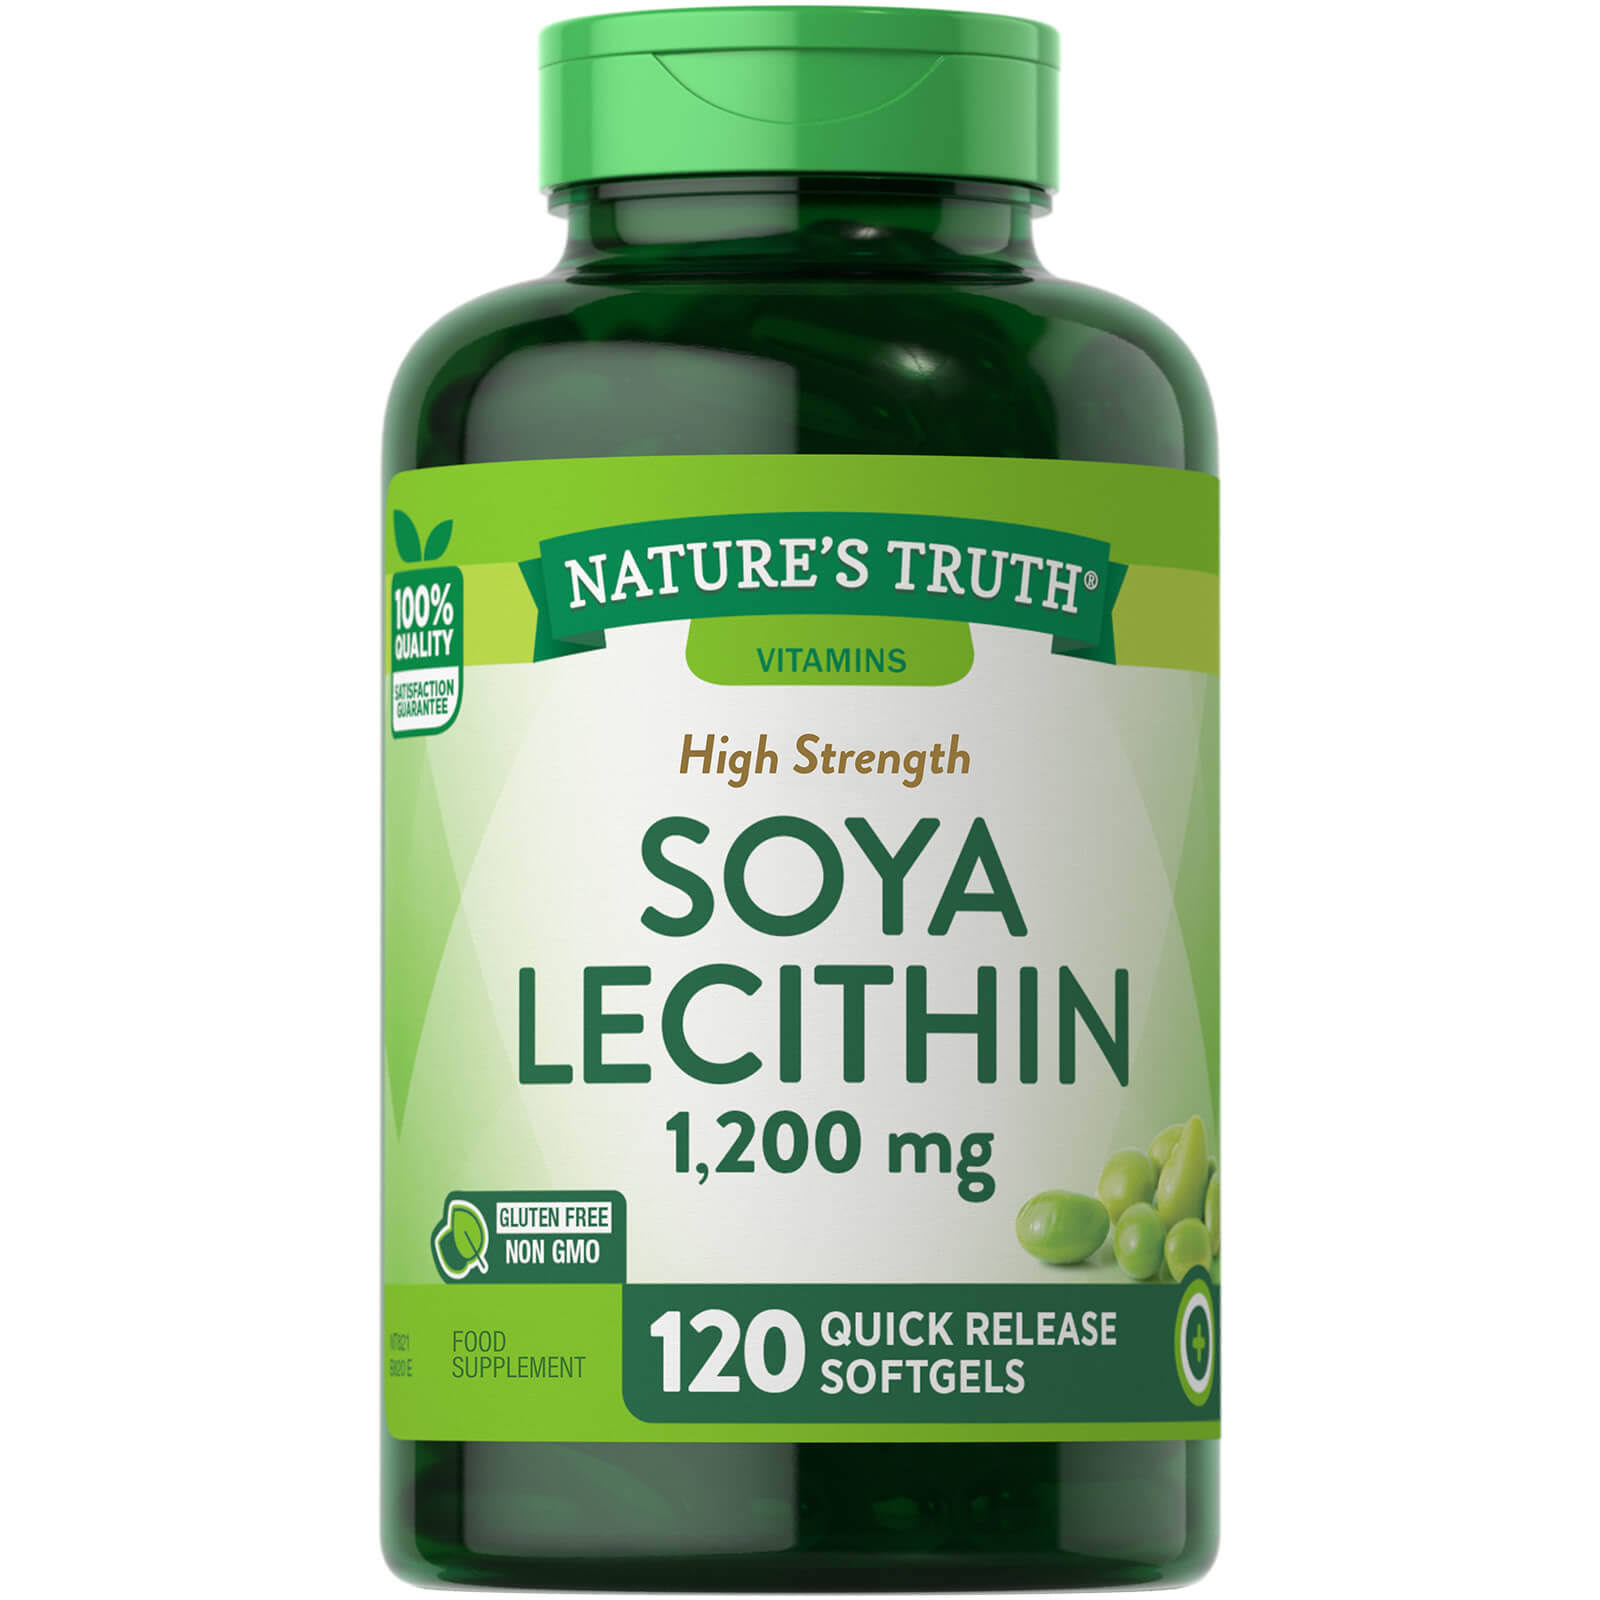 Natures Truth Ultra Soya Lecithin Quick Release Softgels Vitamins - 120ct